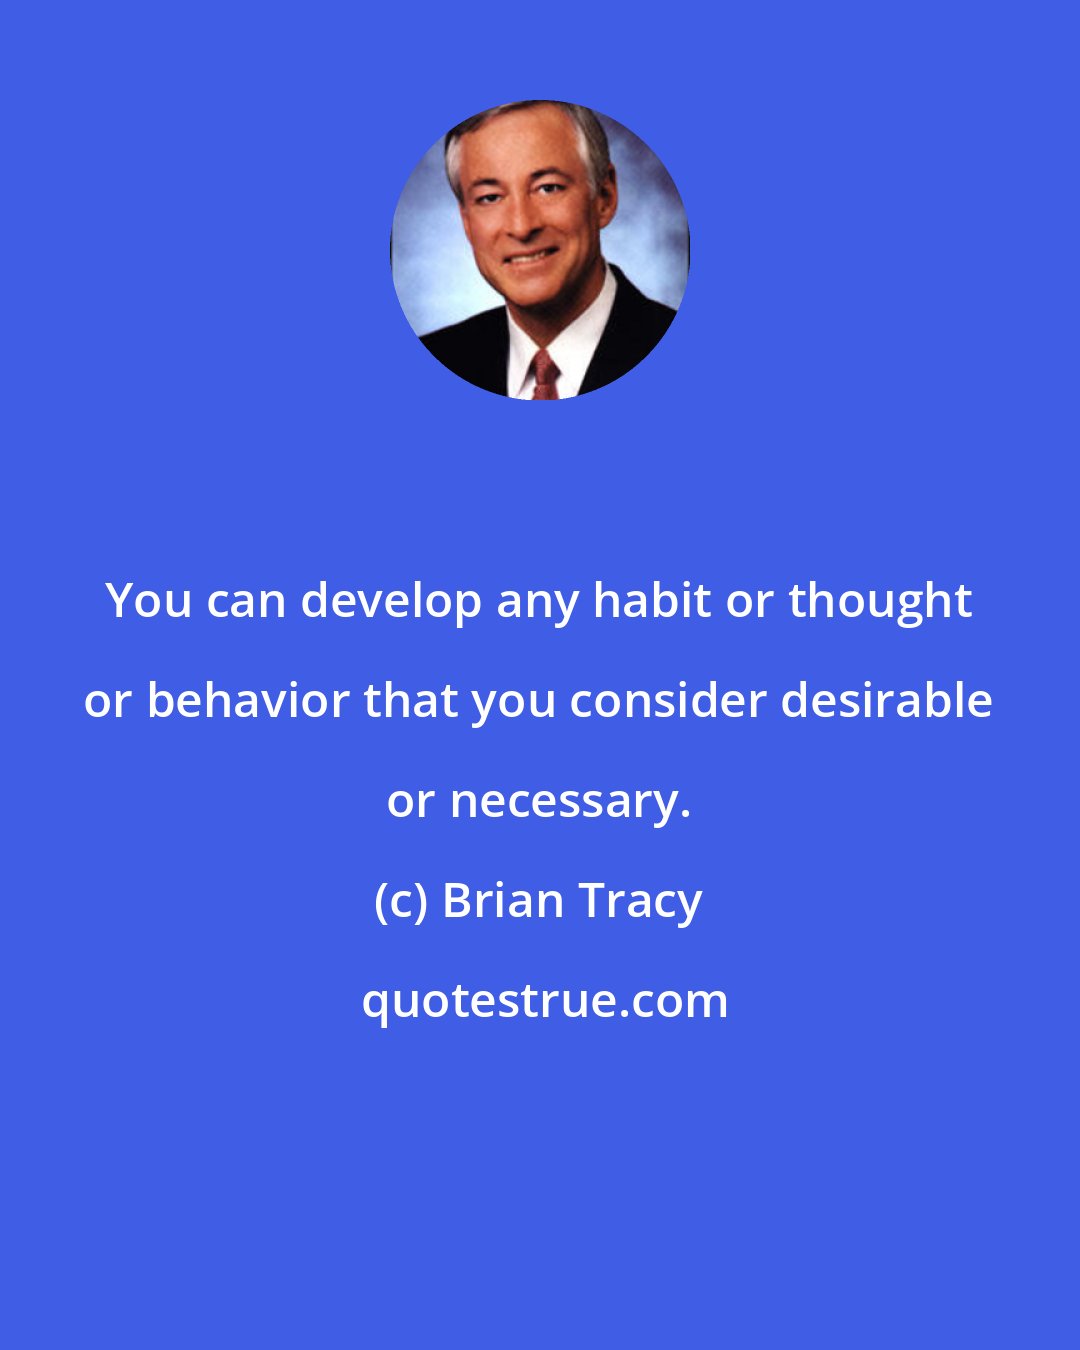 Brian Tracy: You can develop any habit or thought or behavior that you consider desirable or necessary.